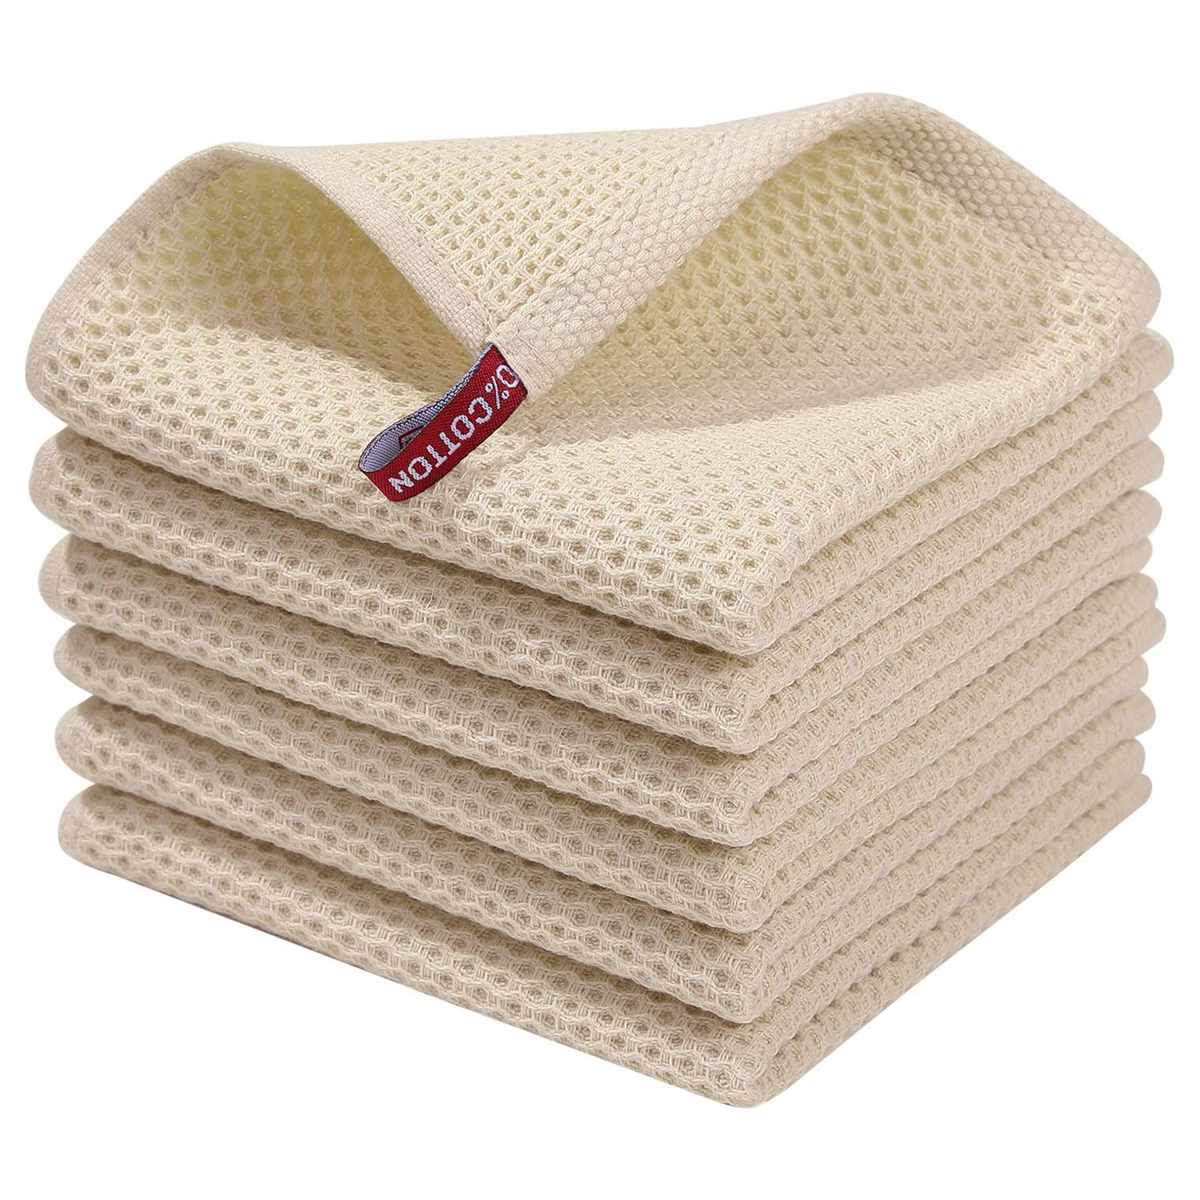 55PCS huici Disposable Cleaning Towels,Dish Towels and Dish Cloths Reusable Towels,Dish Towels and Dish Cloths Reusable Towels